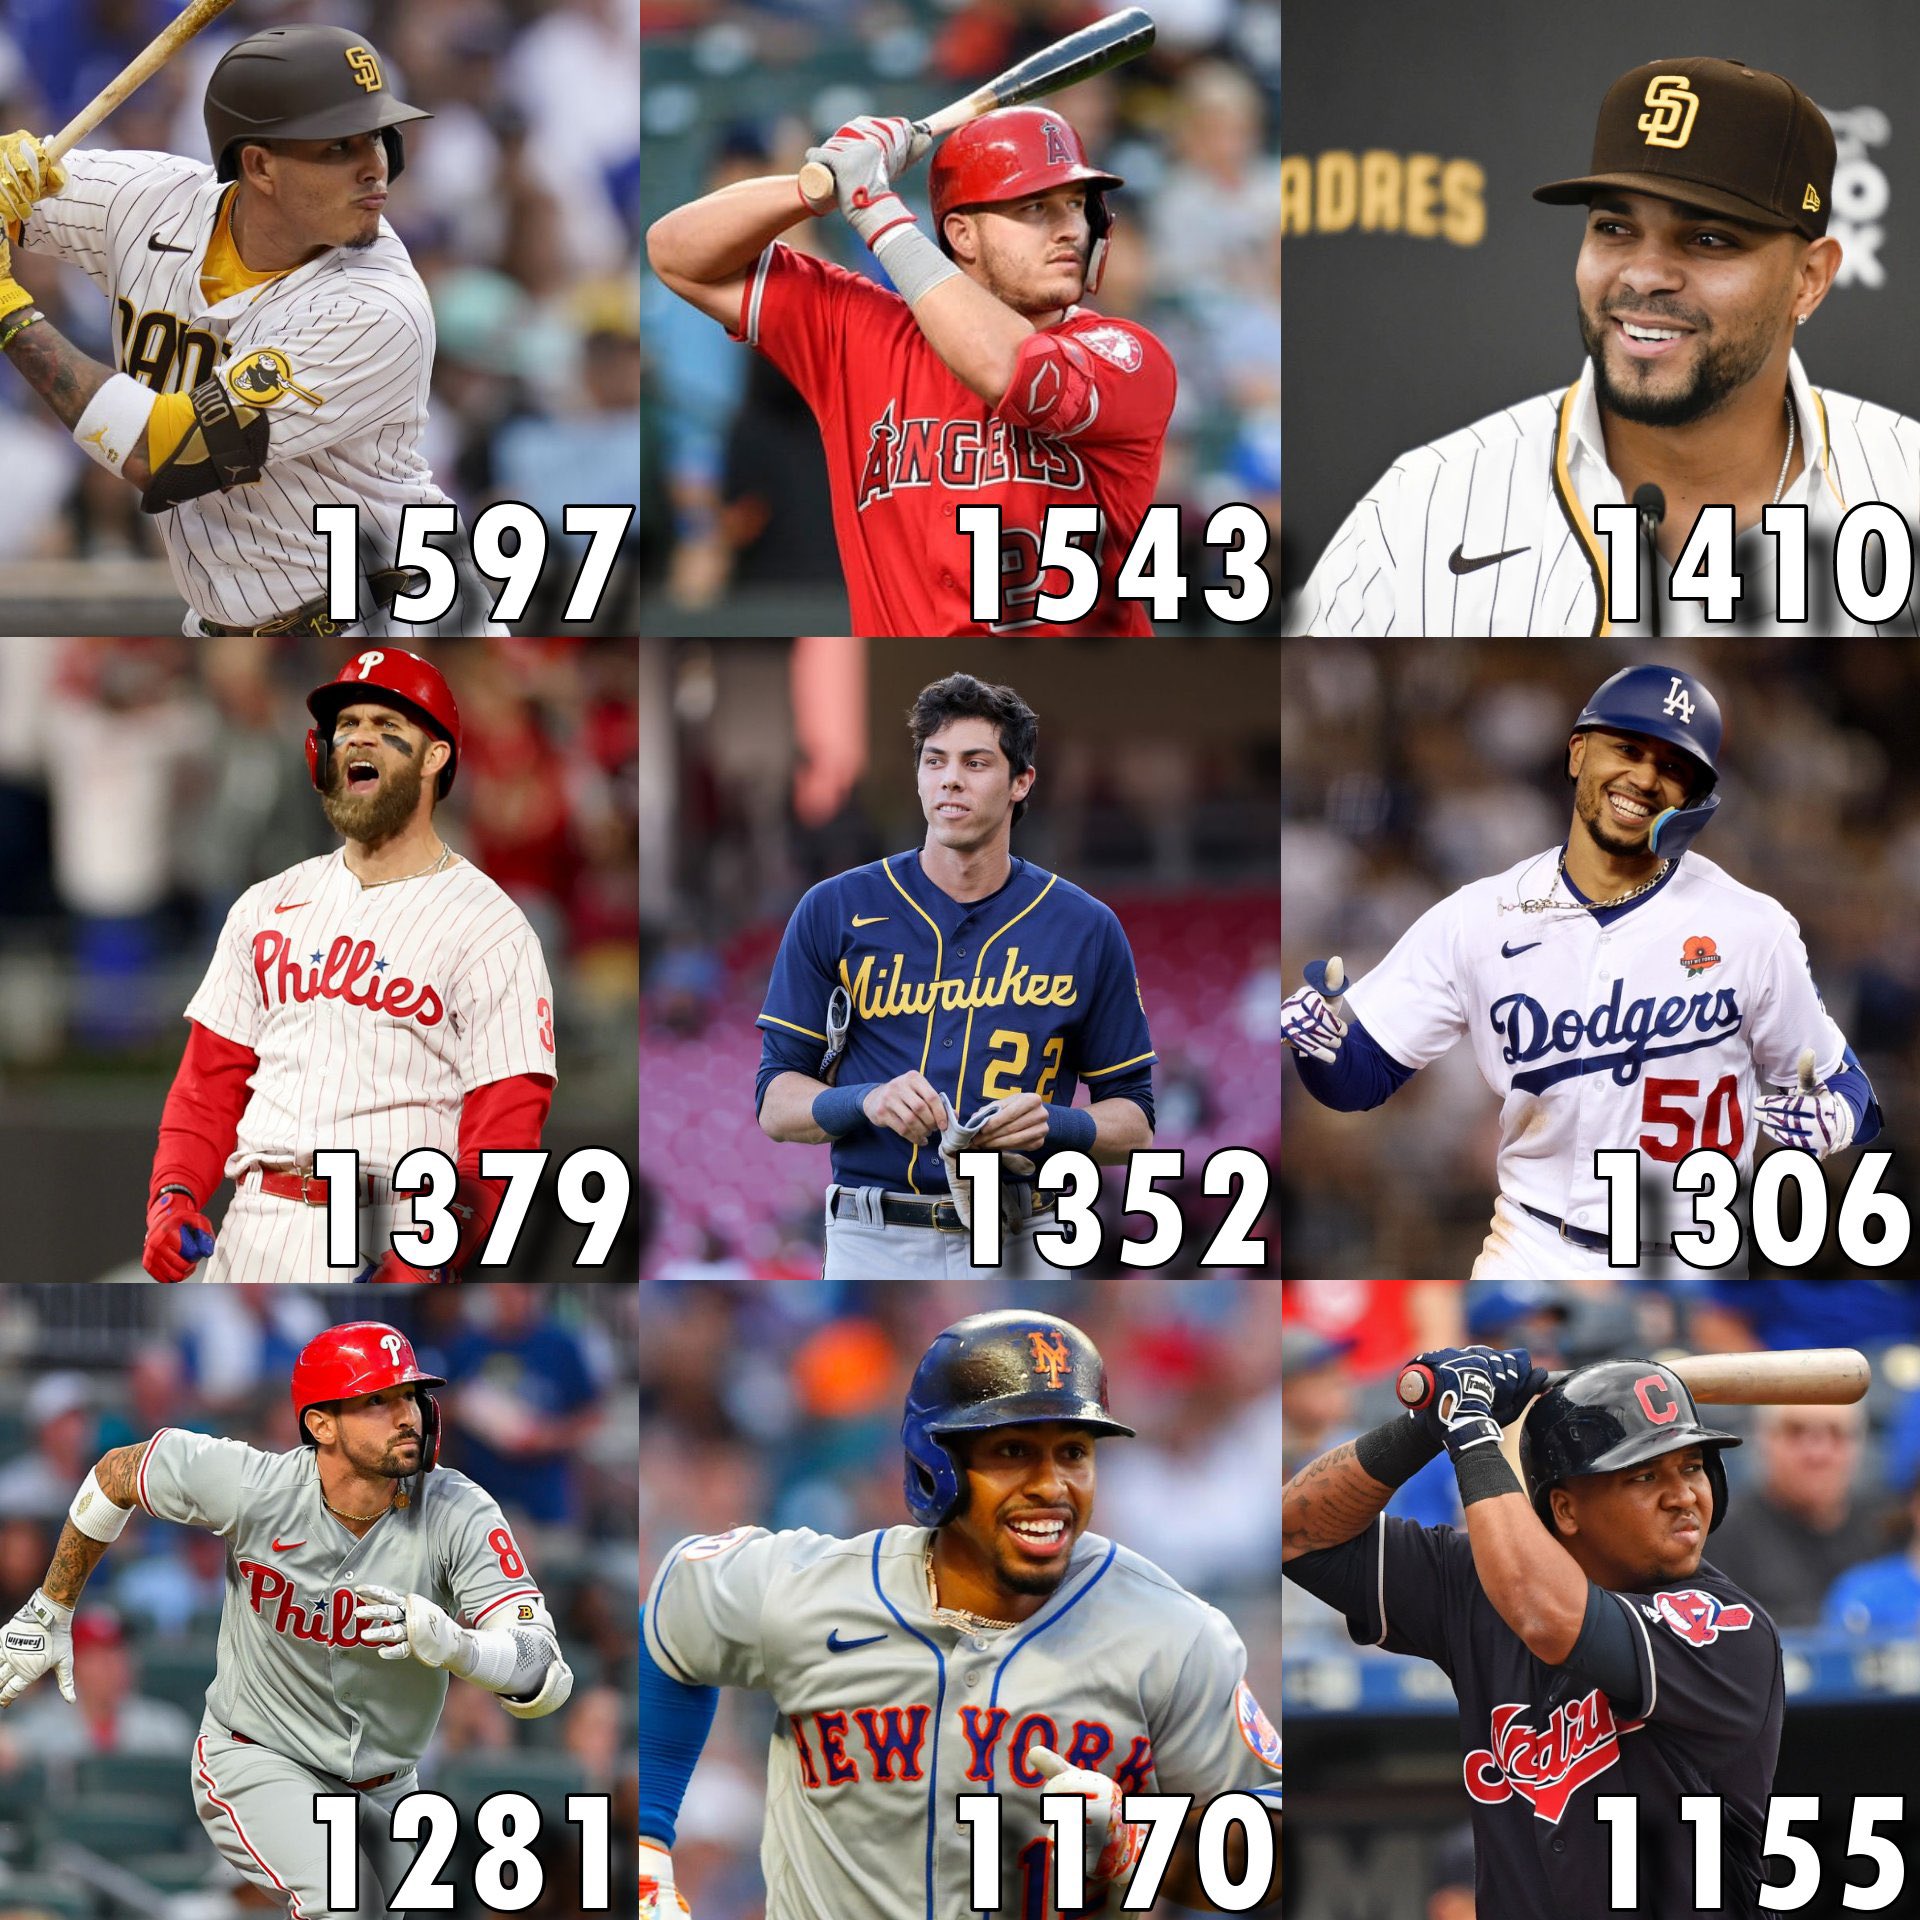 Barstool Baseball Twitter: "Looking at active hits leaders from guys 31 and younger. Who's the next guy we see get to 3000? https://t.co/Bjon3401mD" / Twitter